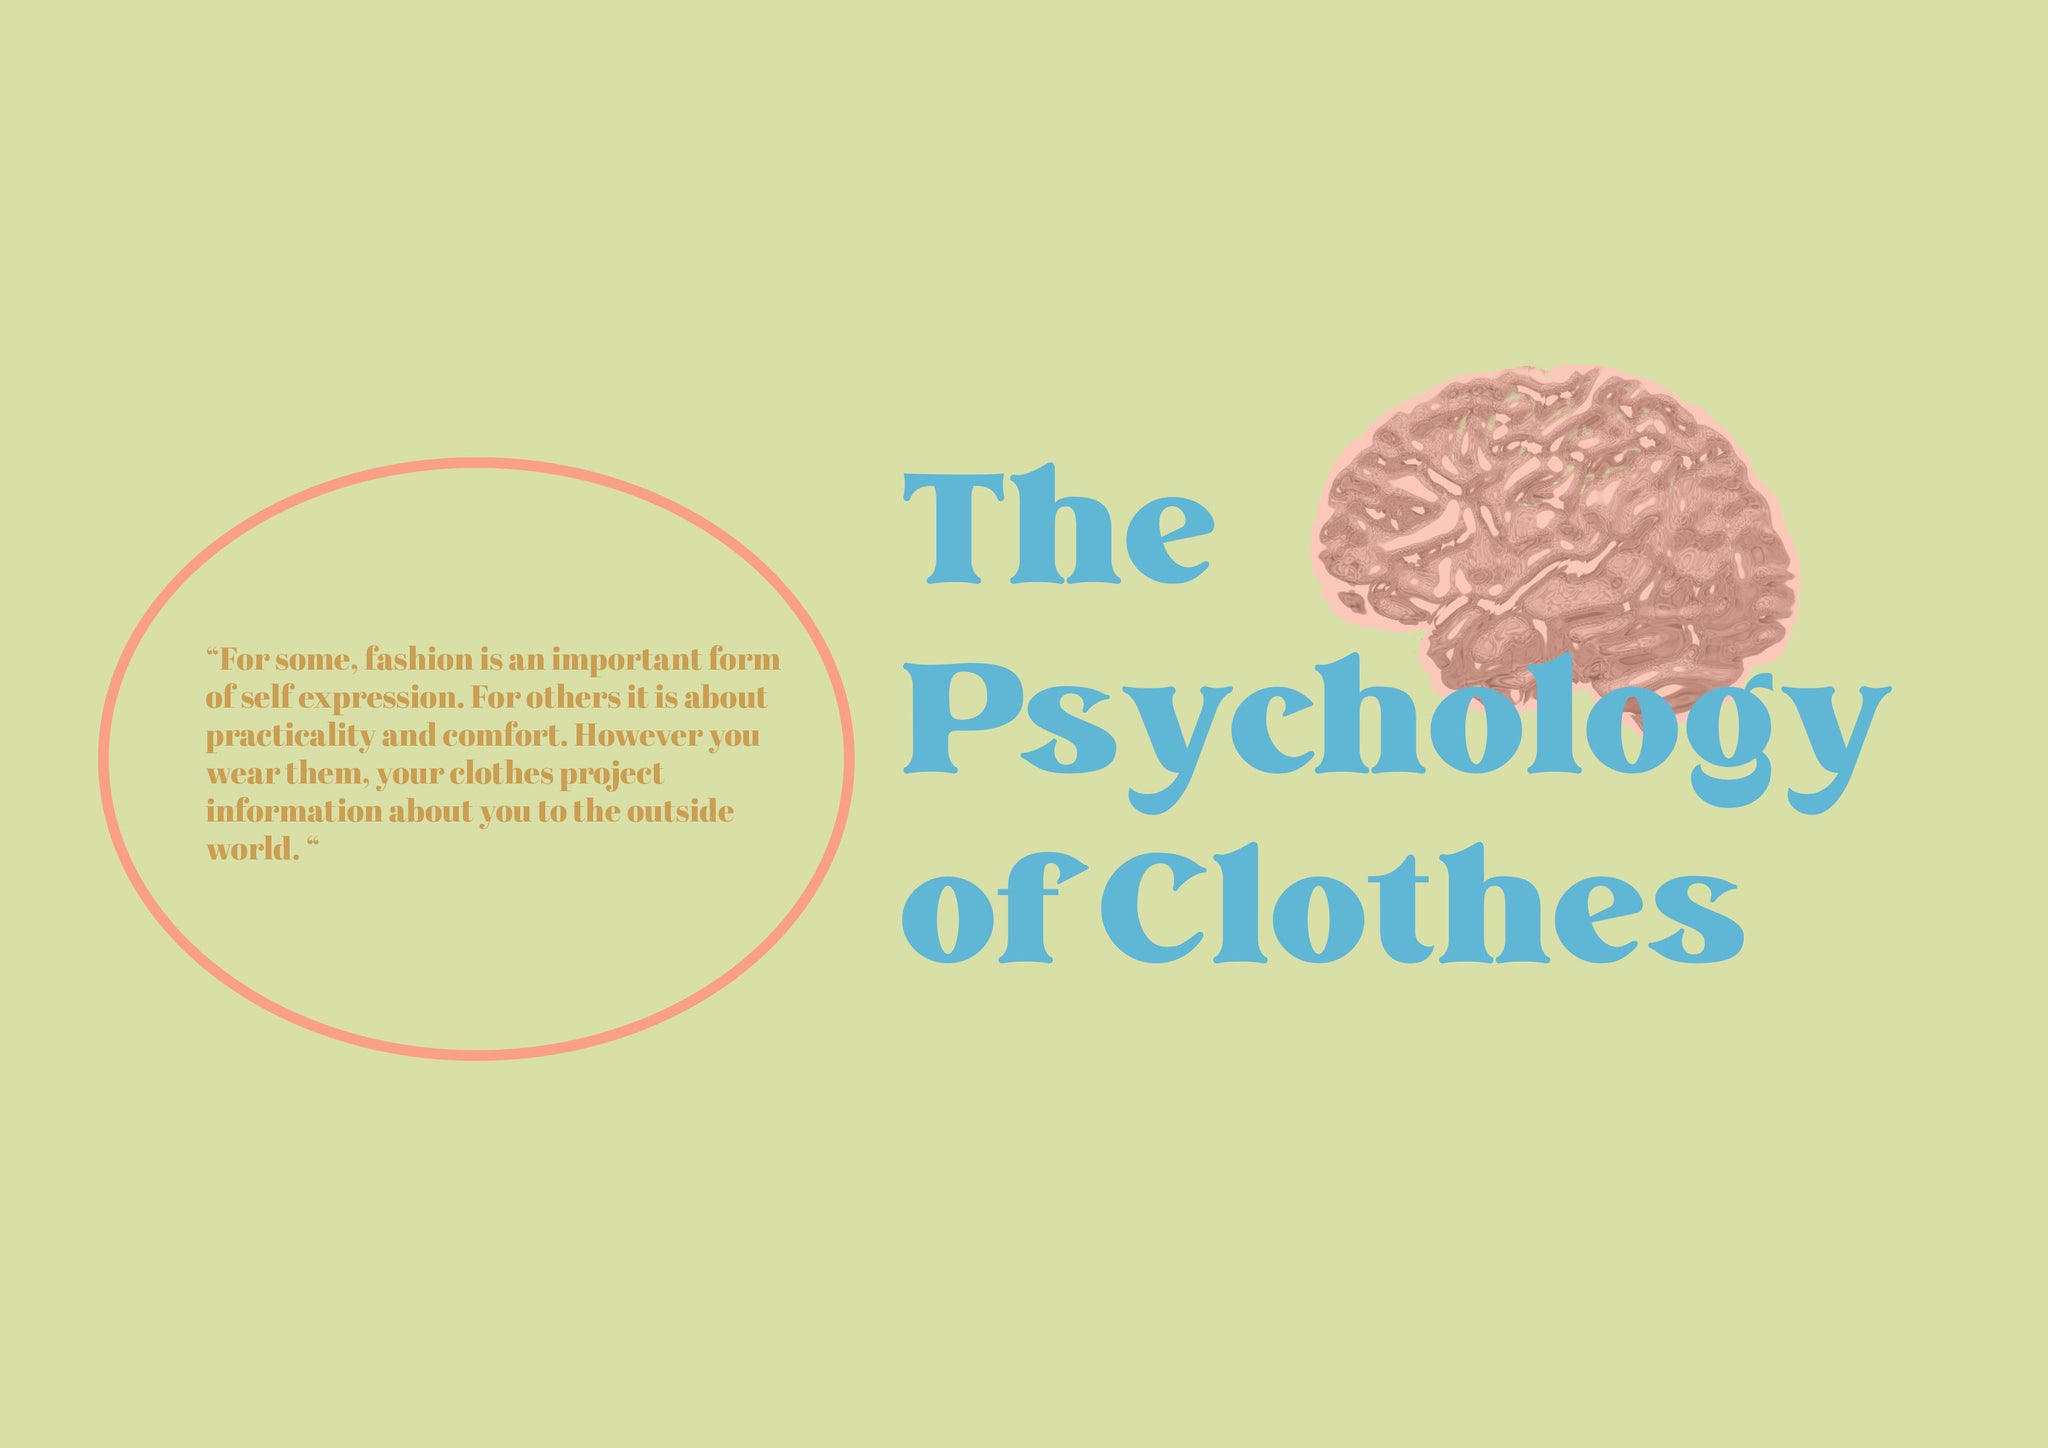 The Psychology of Clothes